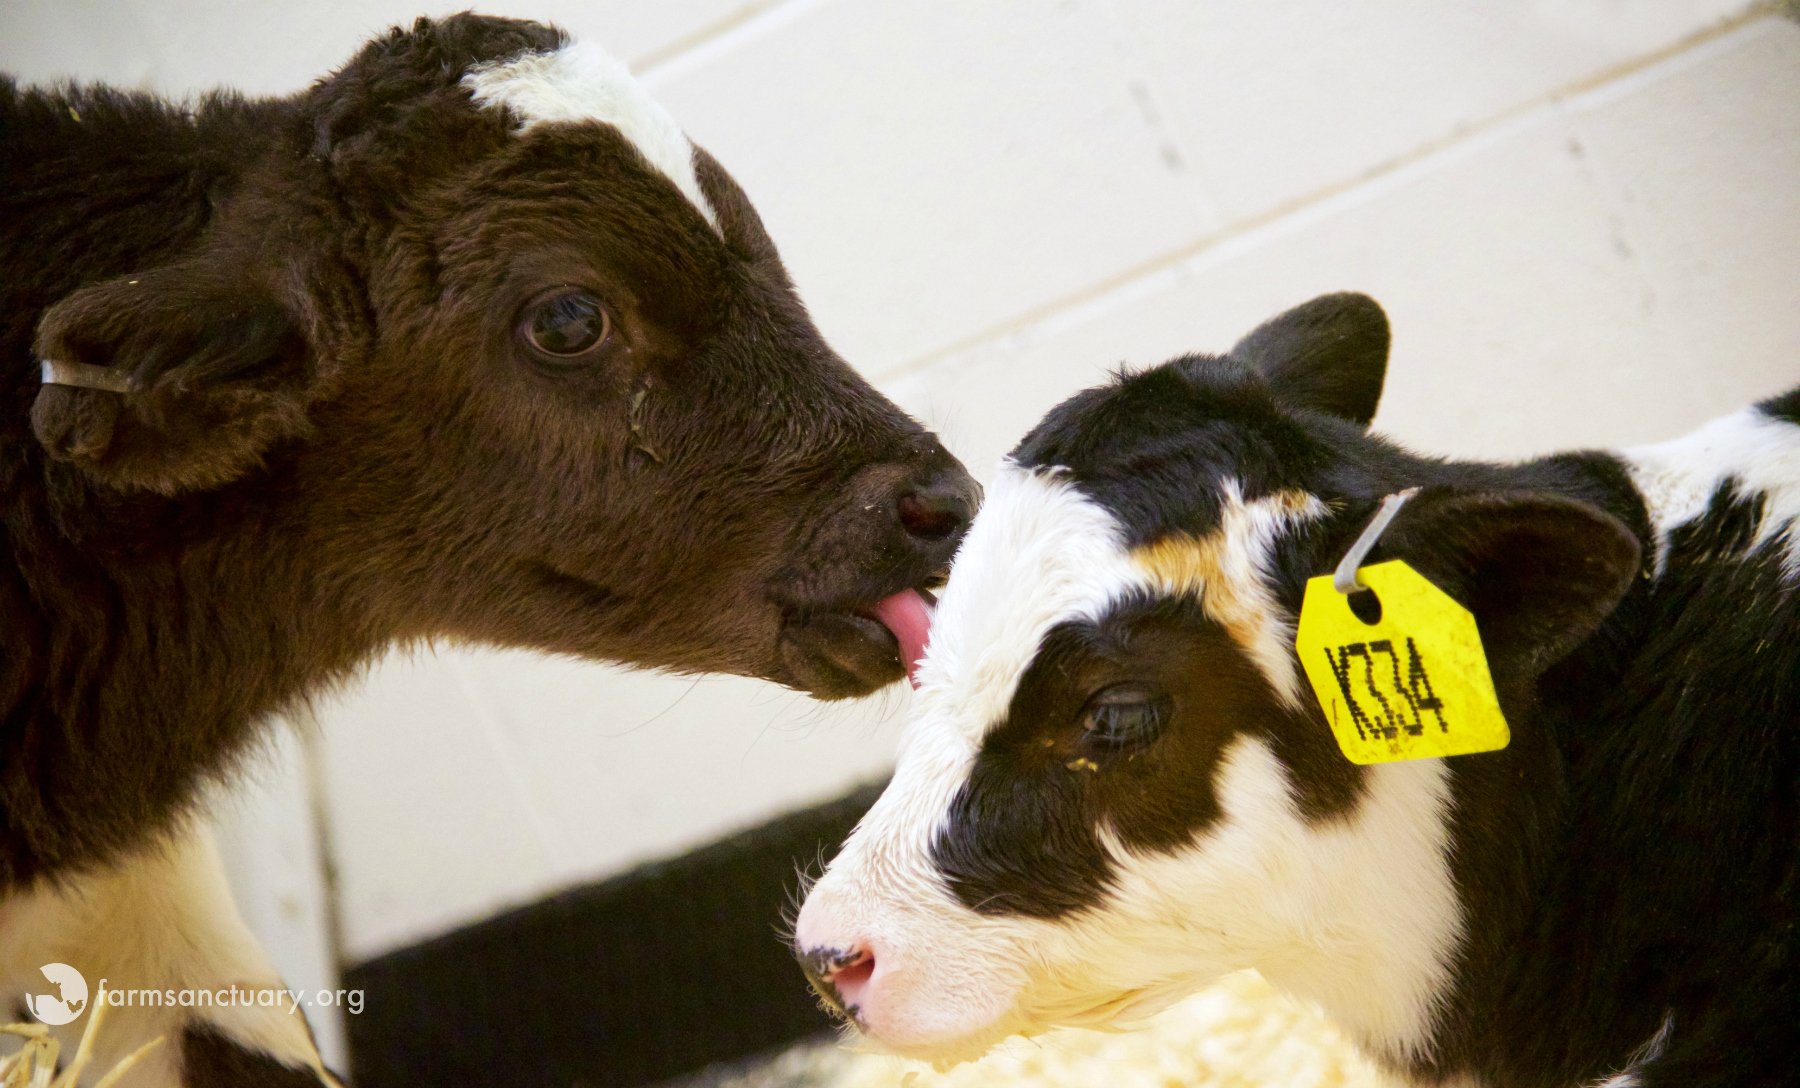 One calf licks another after they are rescued